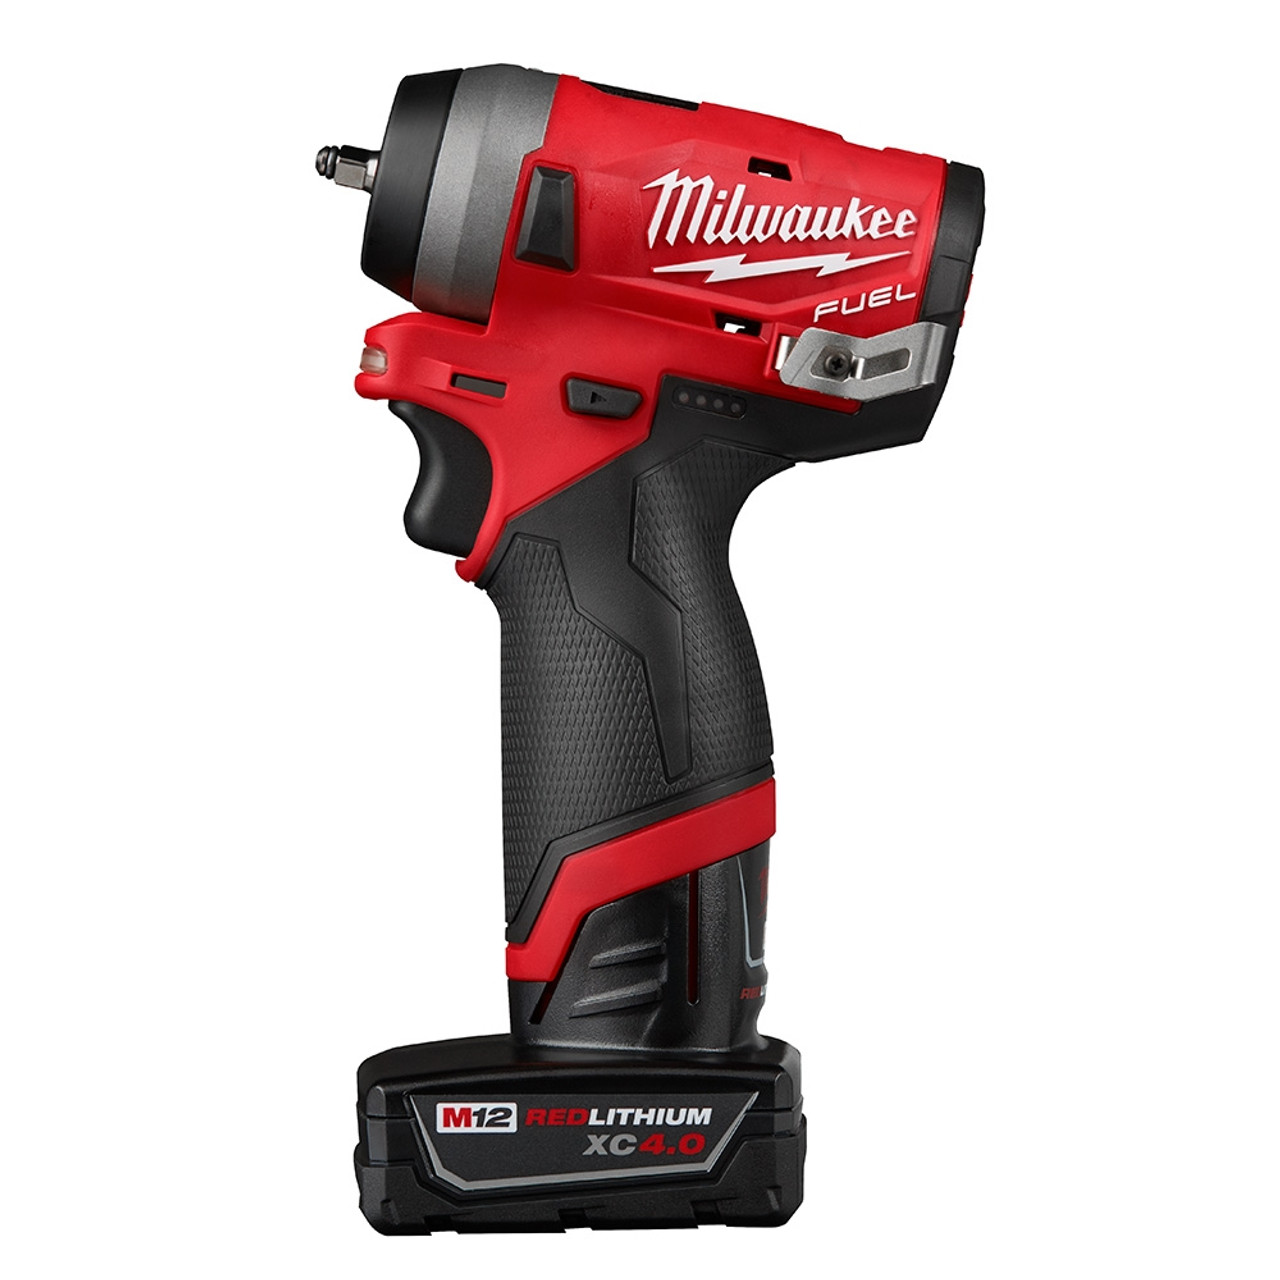 Milwaukee 2554-20 M12 FUEL 3/8 Stubby Impact Wrench Bare, 44% OFF